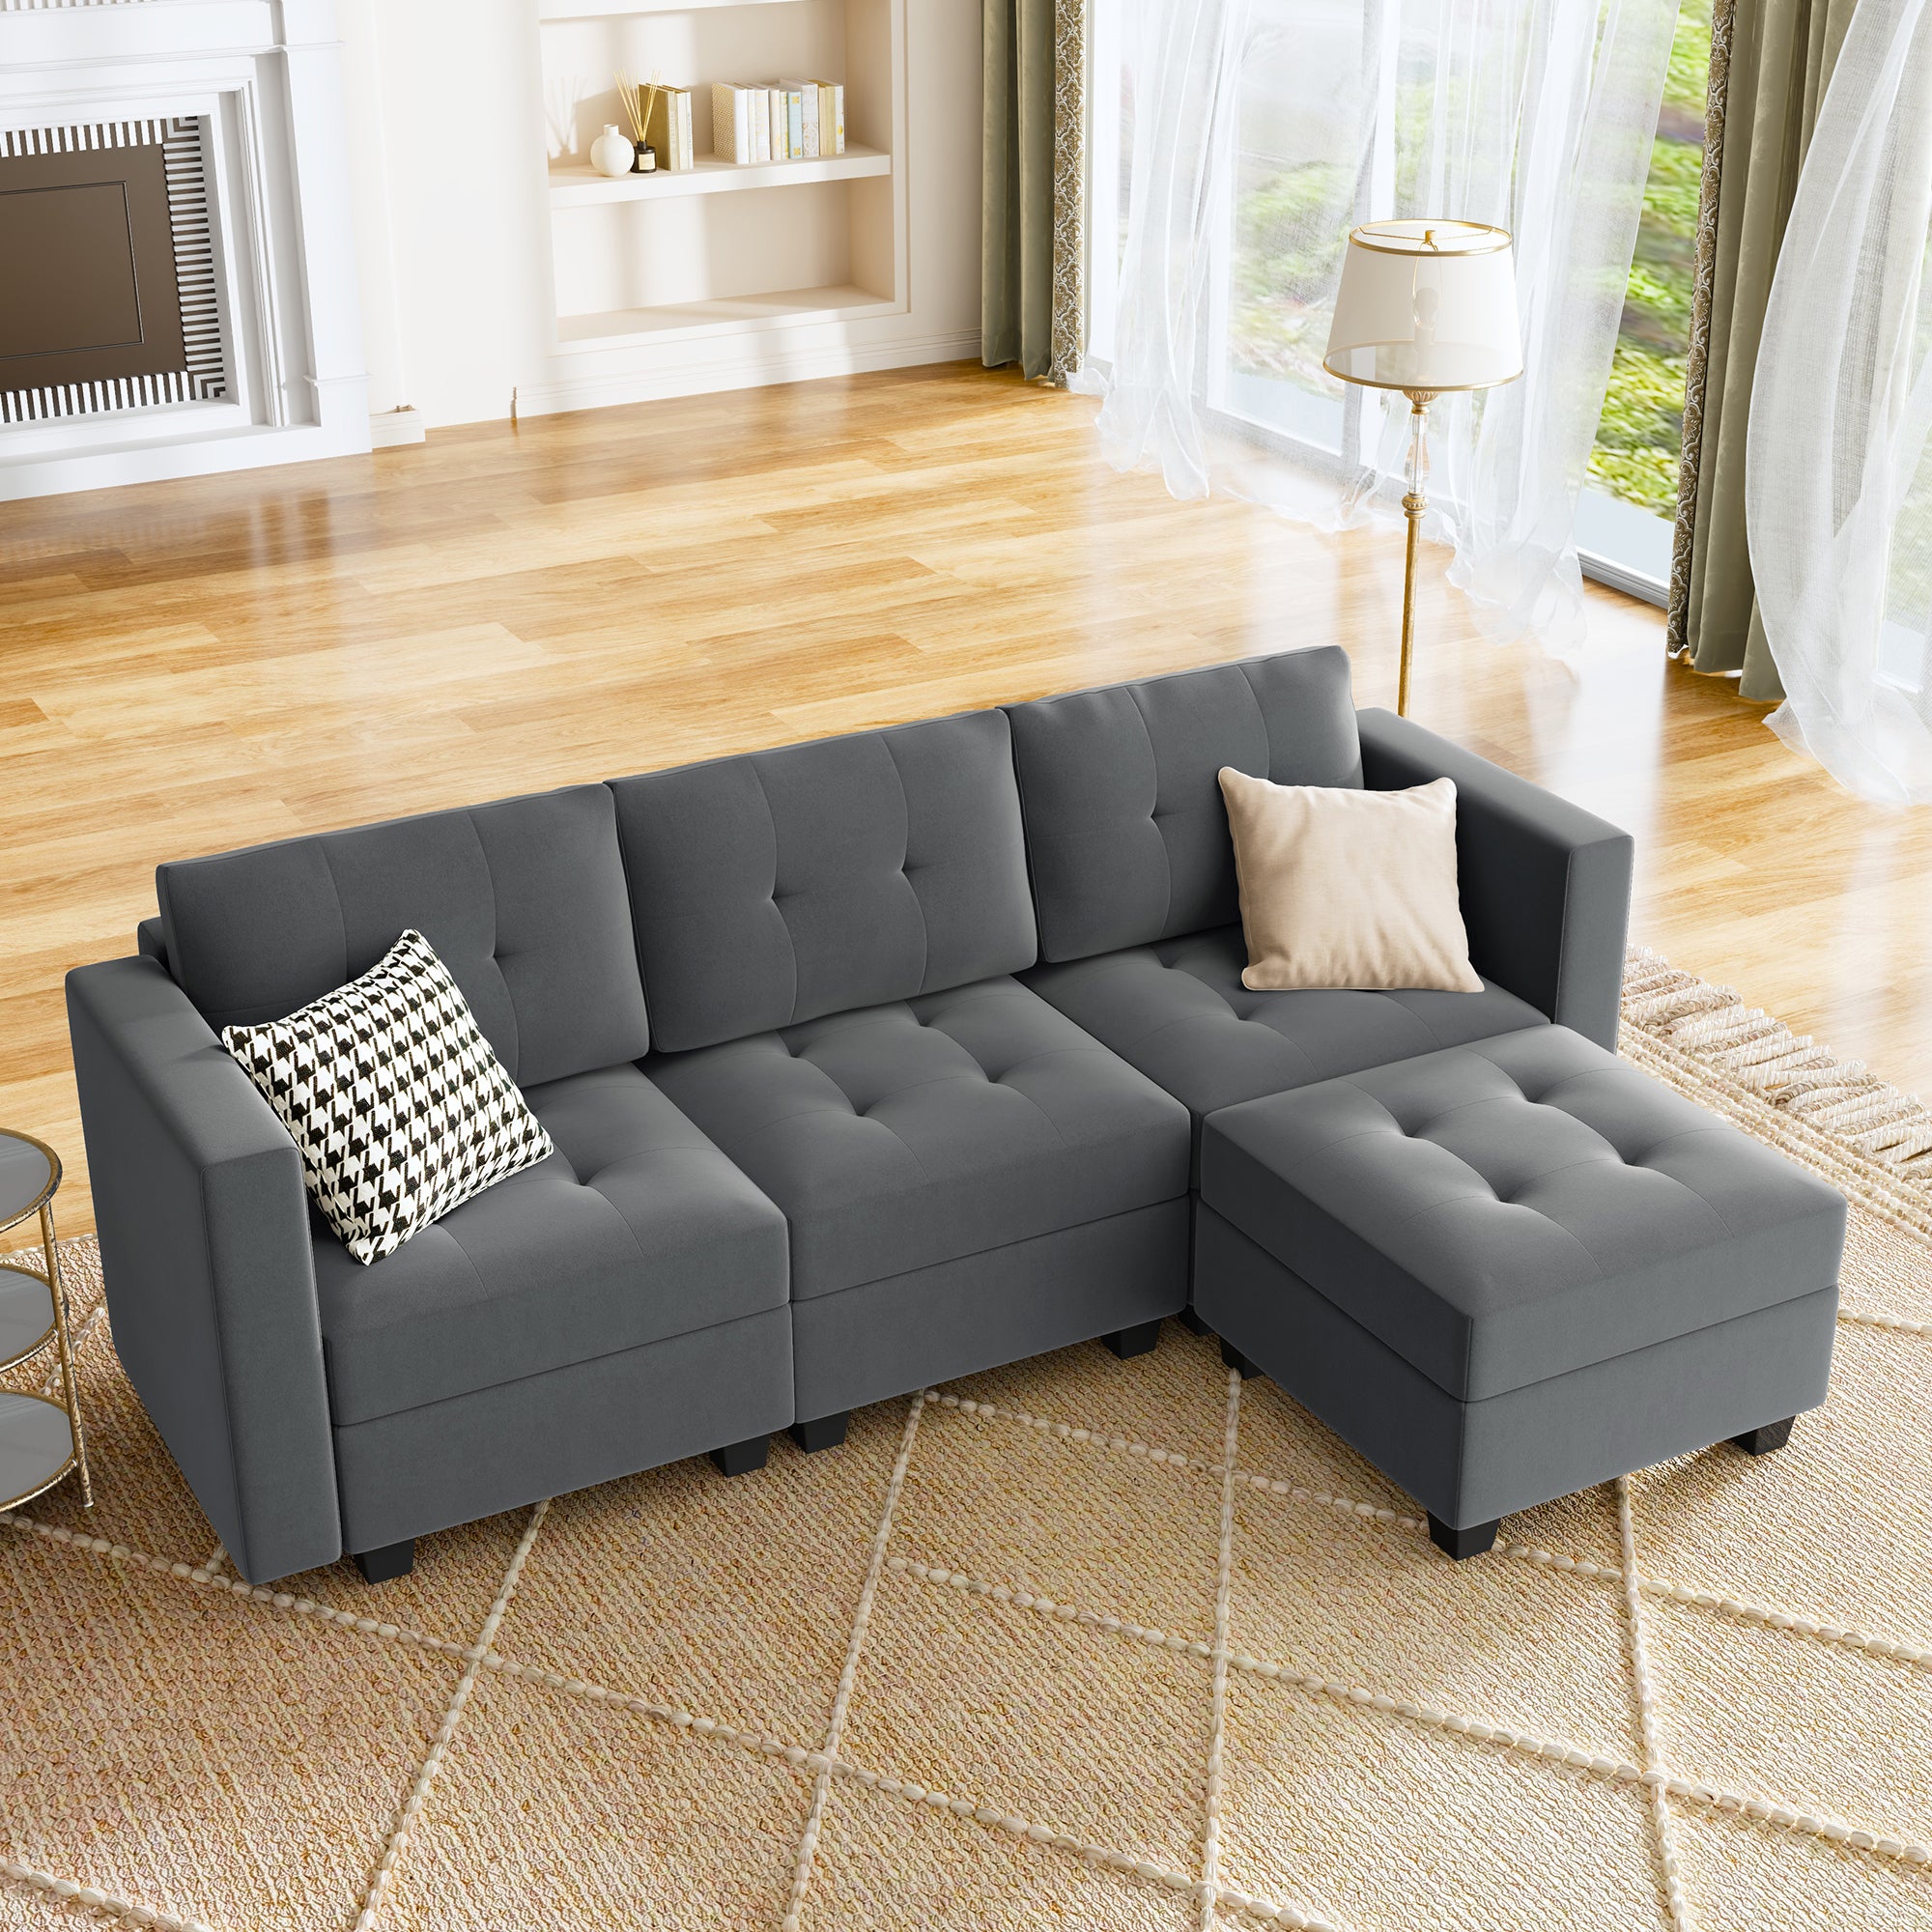 HONBAY Tufted Modular Sofa 3-Seat+1-Side Armrest+1-Ottoman with Storage Seater